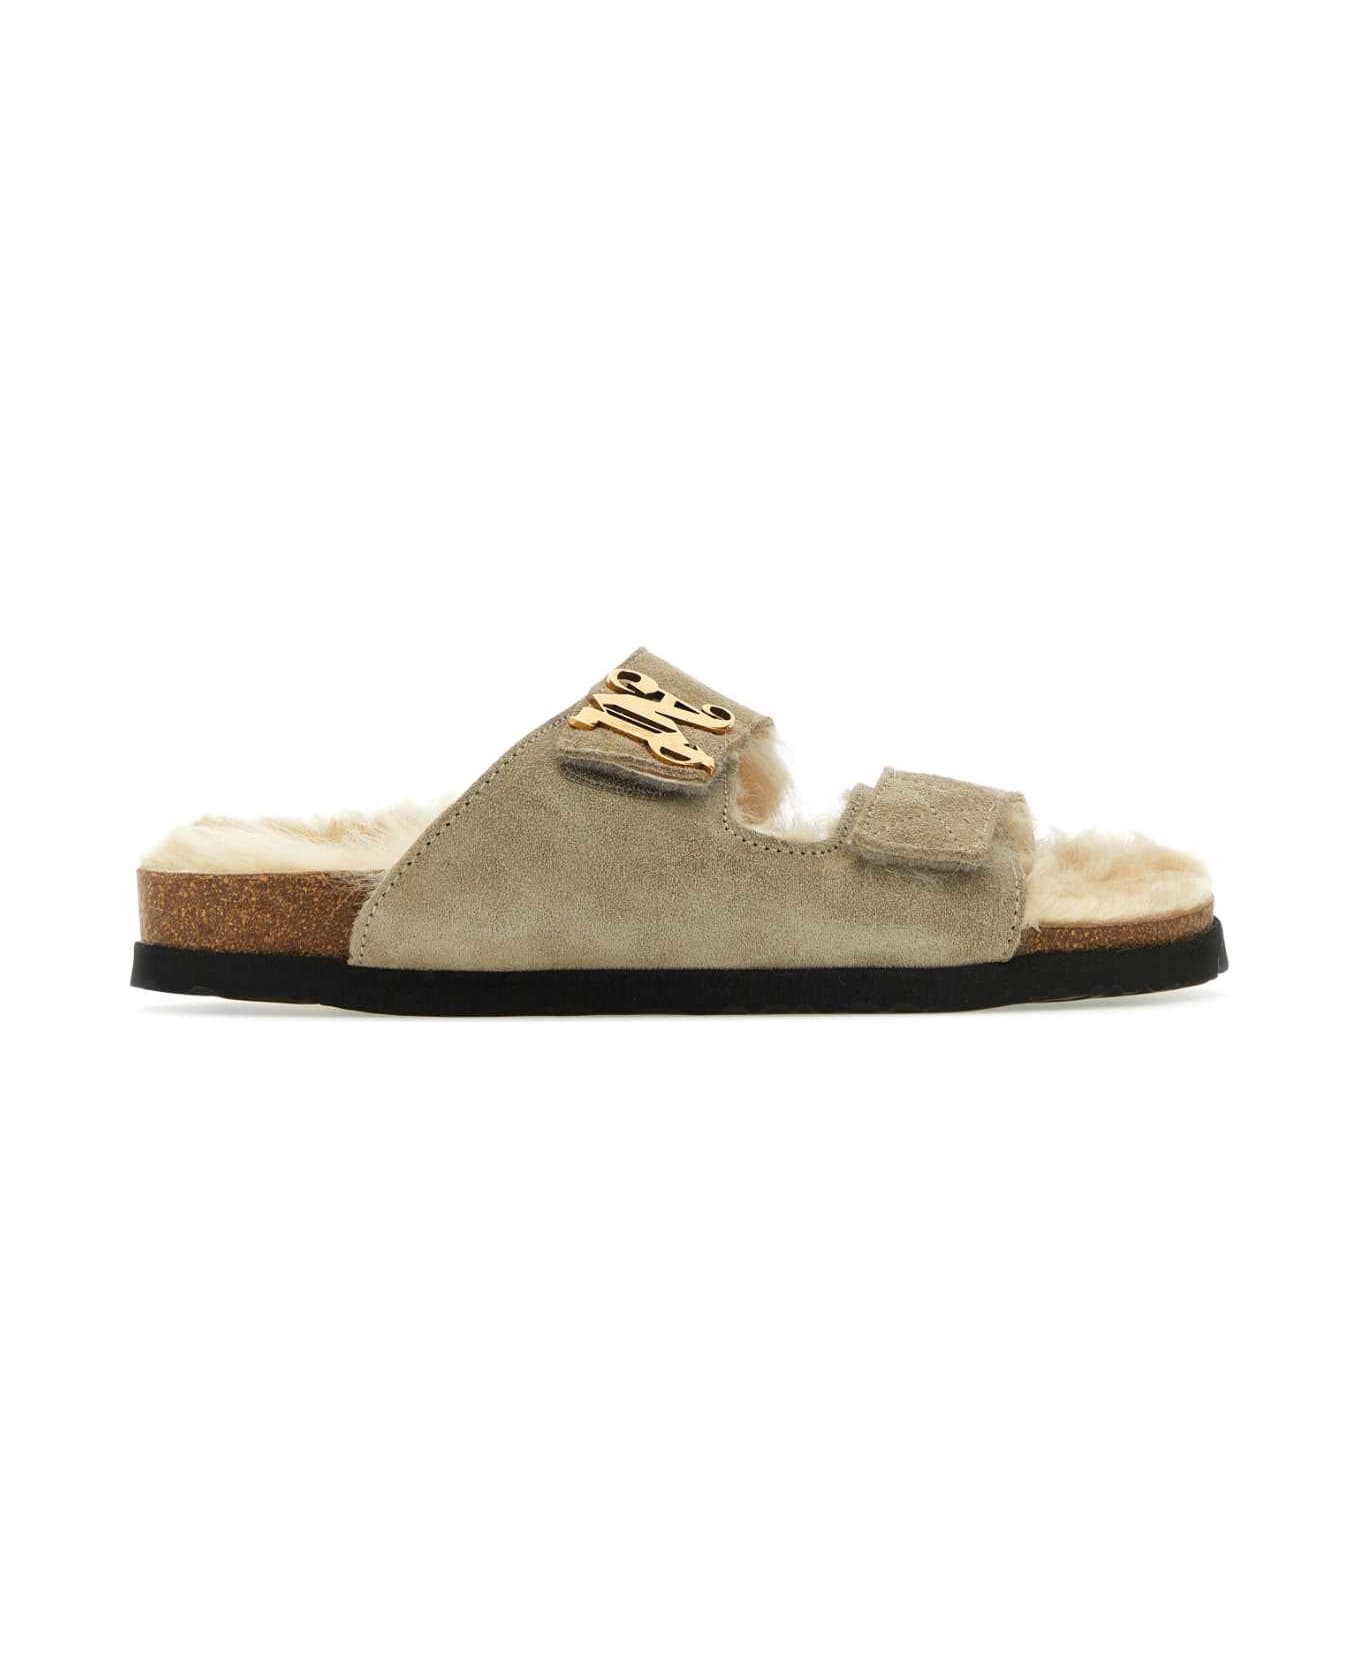 Palm Angels Sand Suede Slippers - CREAMBEIG その他各種シューズ